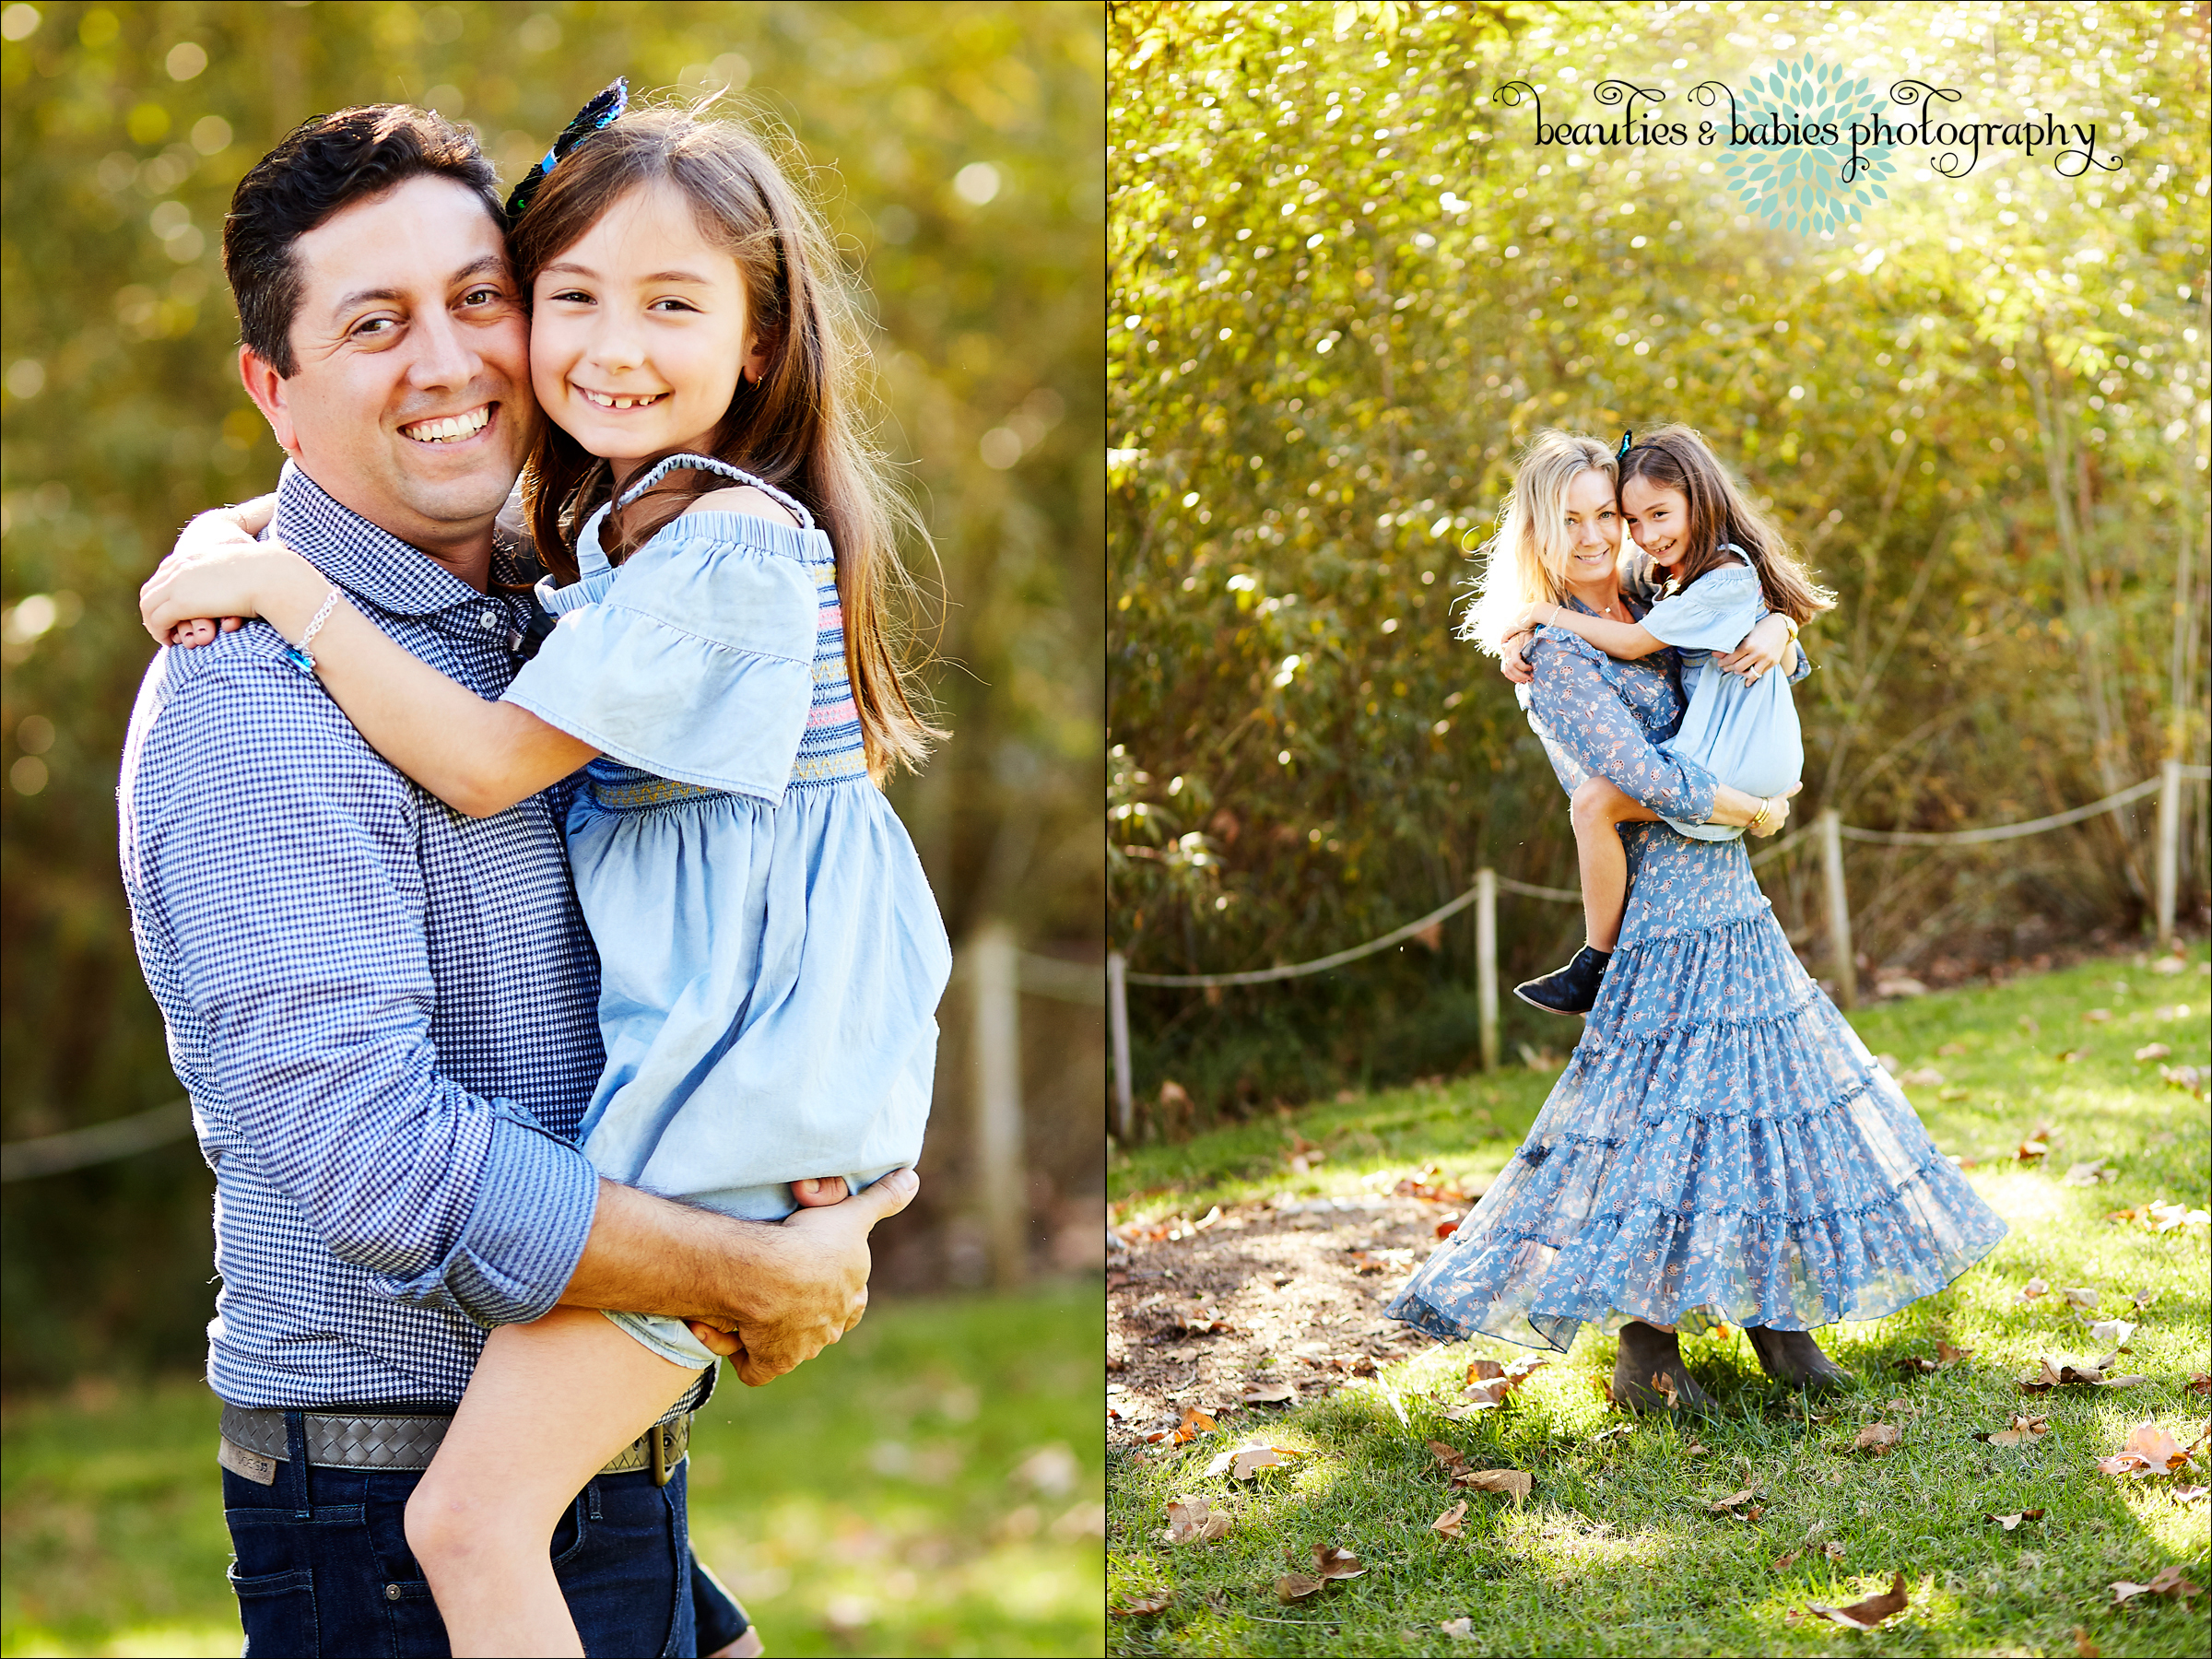 Family Photography Los Angeles, best family photographer Los Angeles, Children's photography Los Angeles photographer, kids portrait photography, Los Angeles family outdoor photography